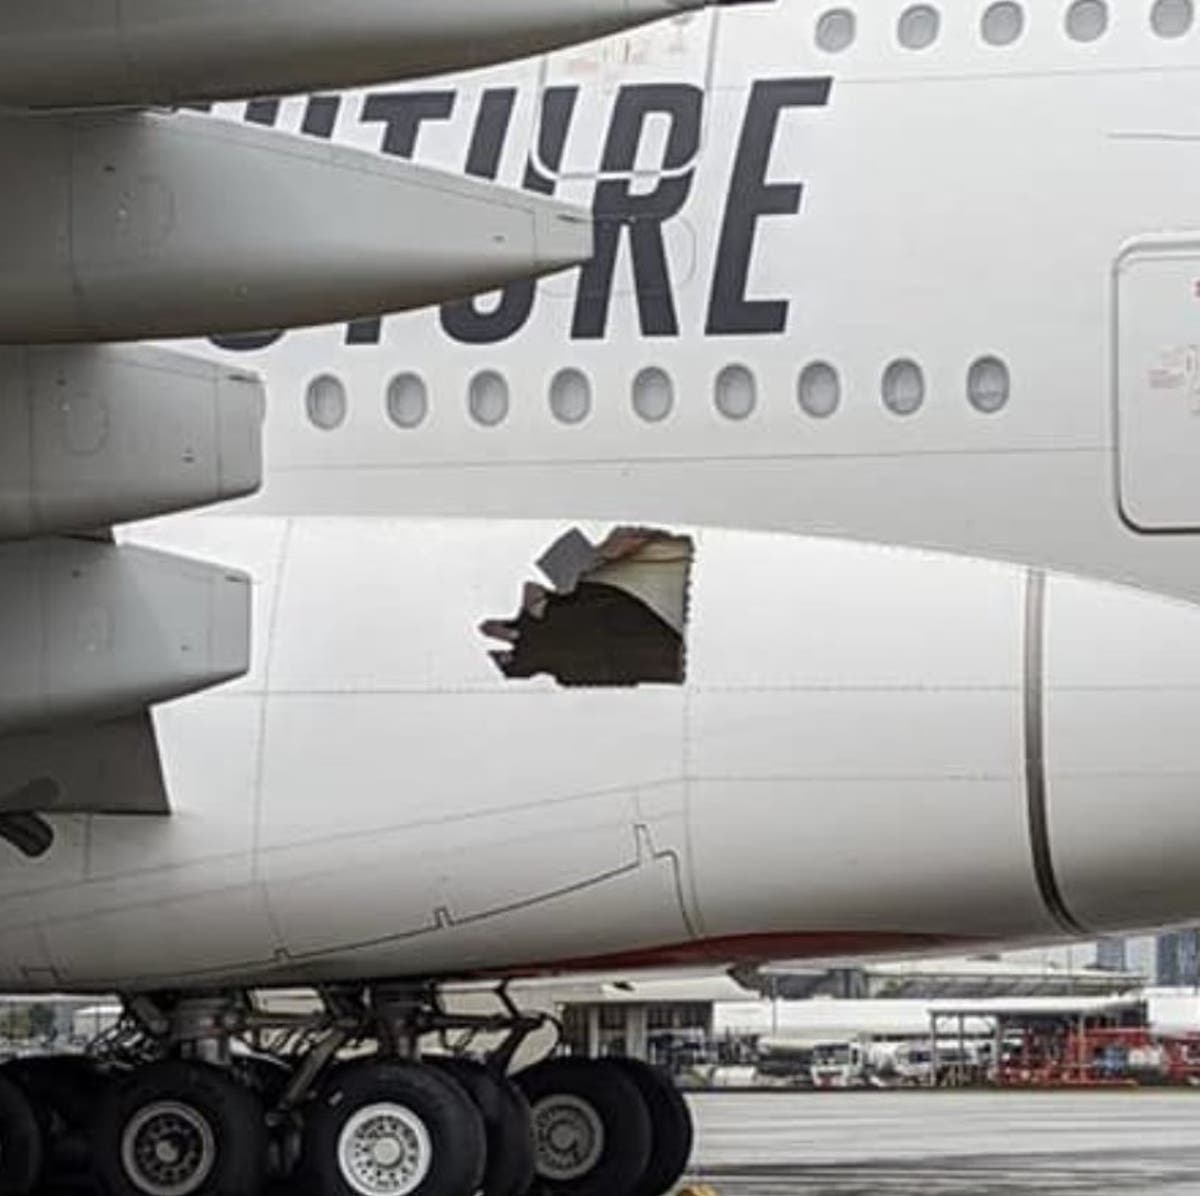 Emirates plane flies for 14 hours with hole in side